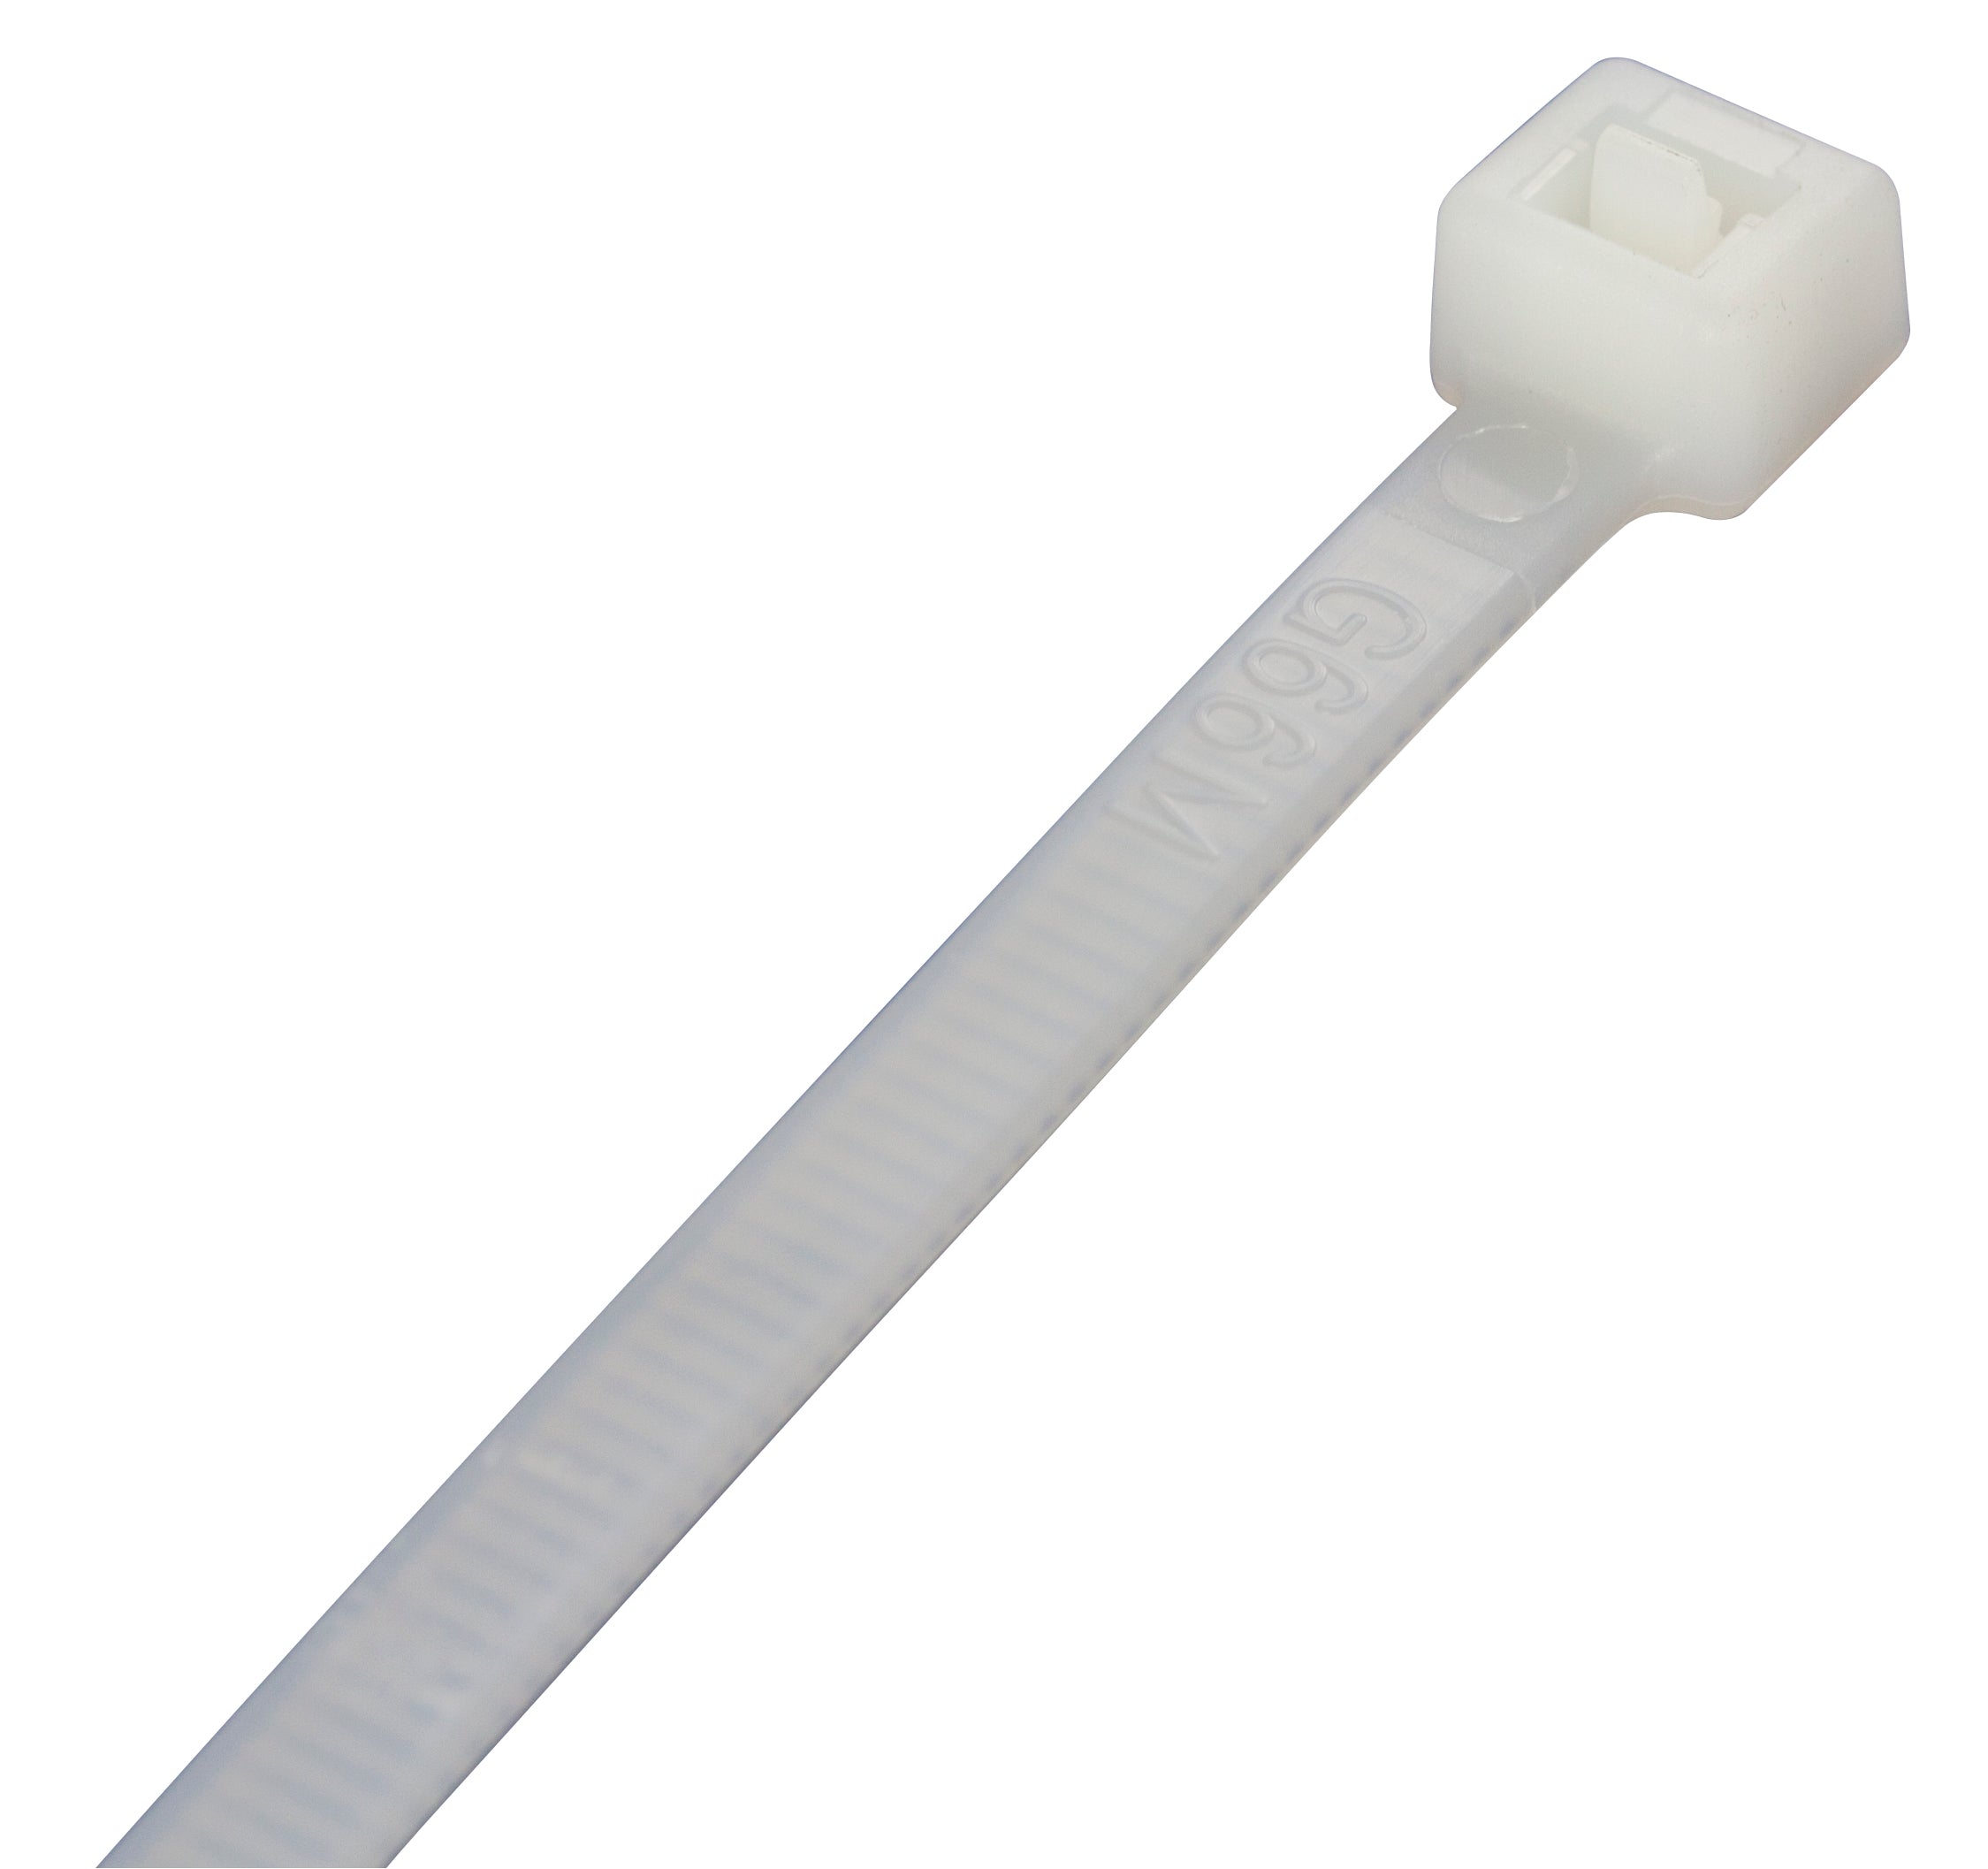 Premium Natural Cable Ties 120mm x 2.5mm - Pack of 100